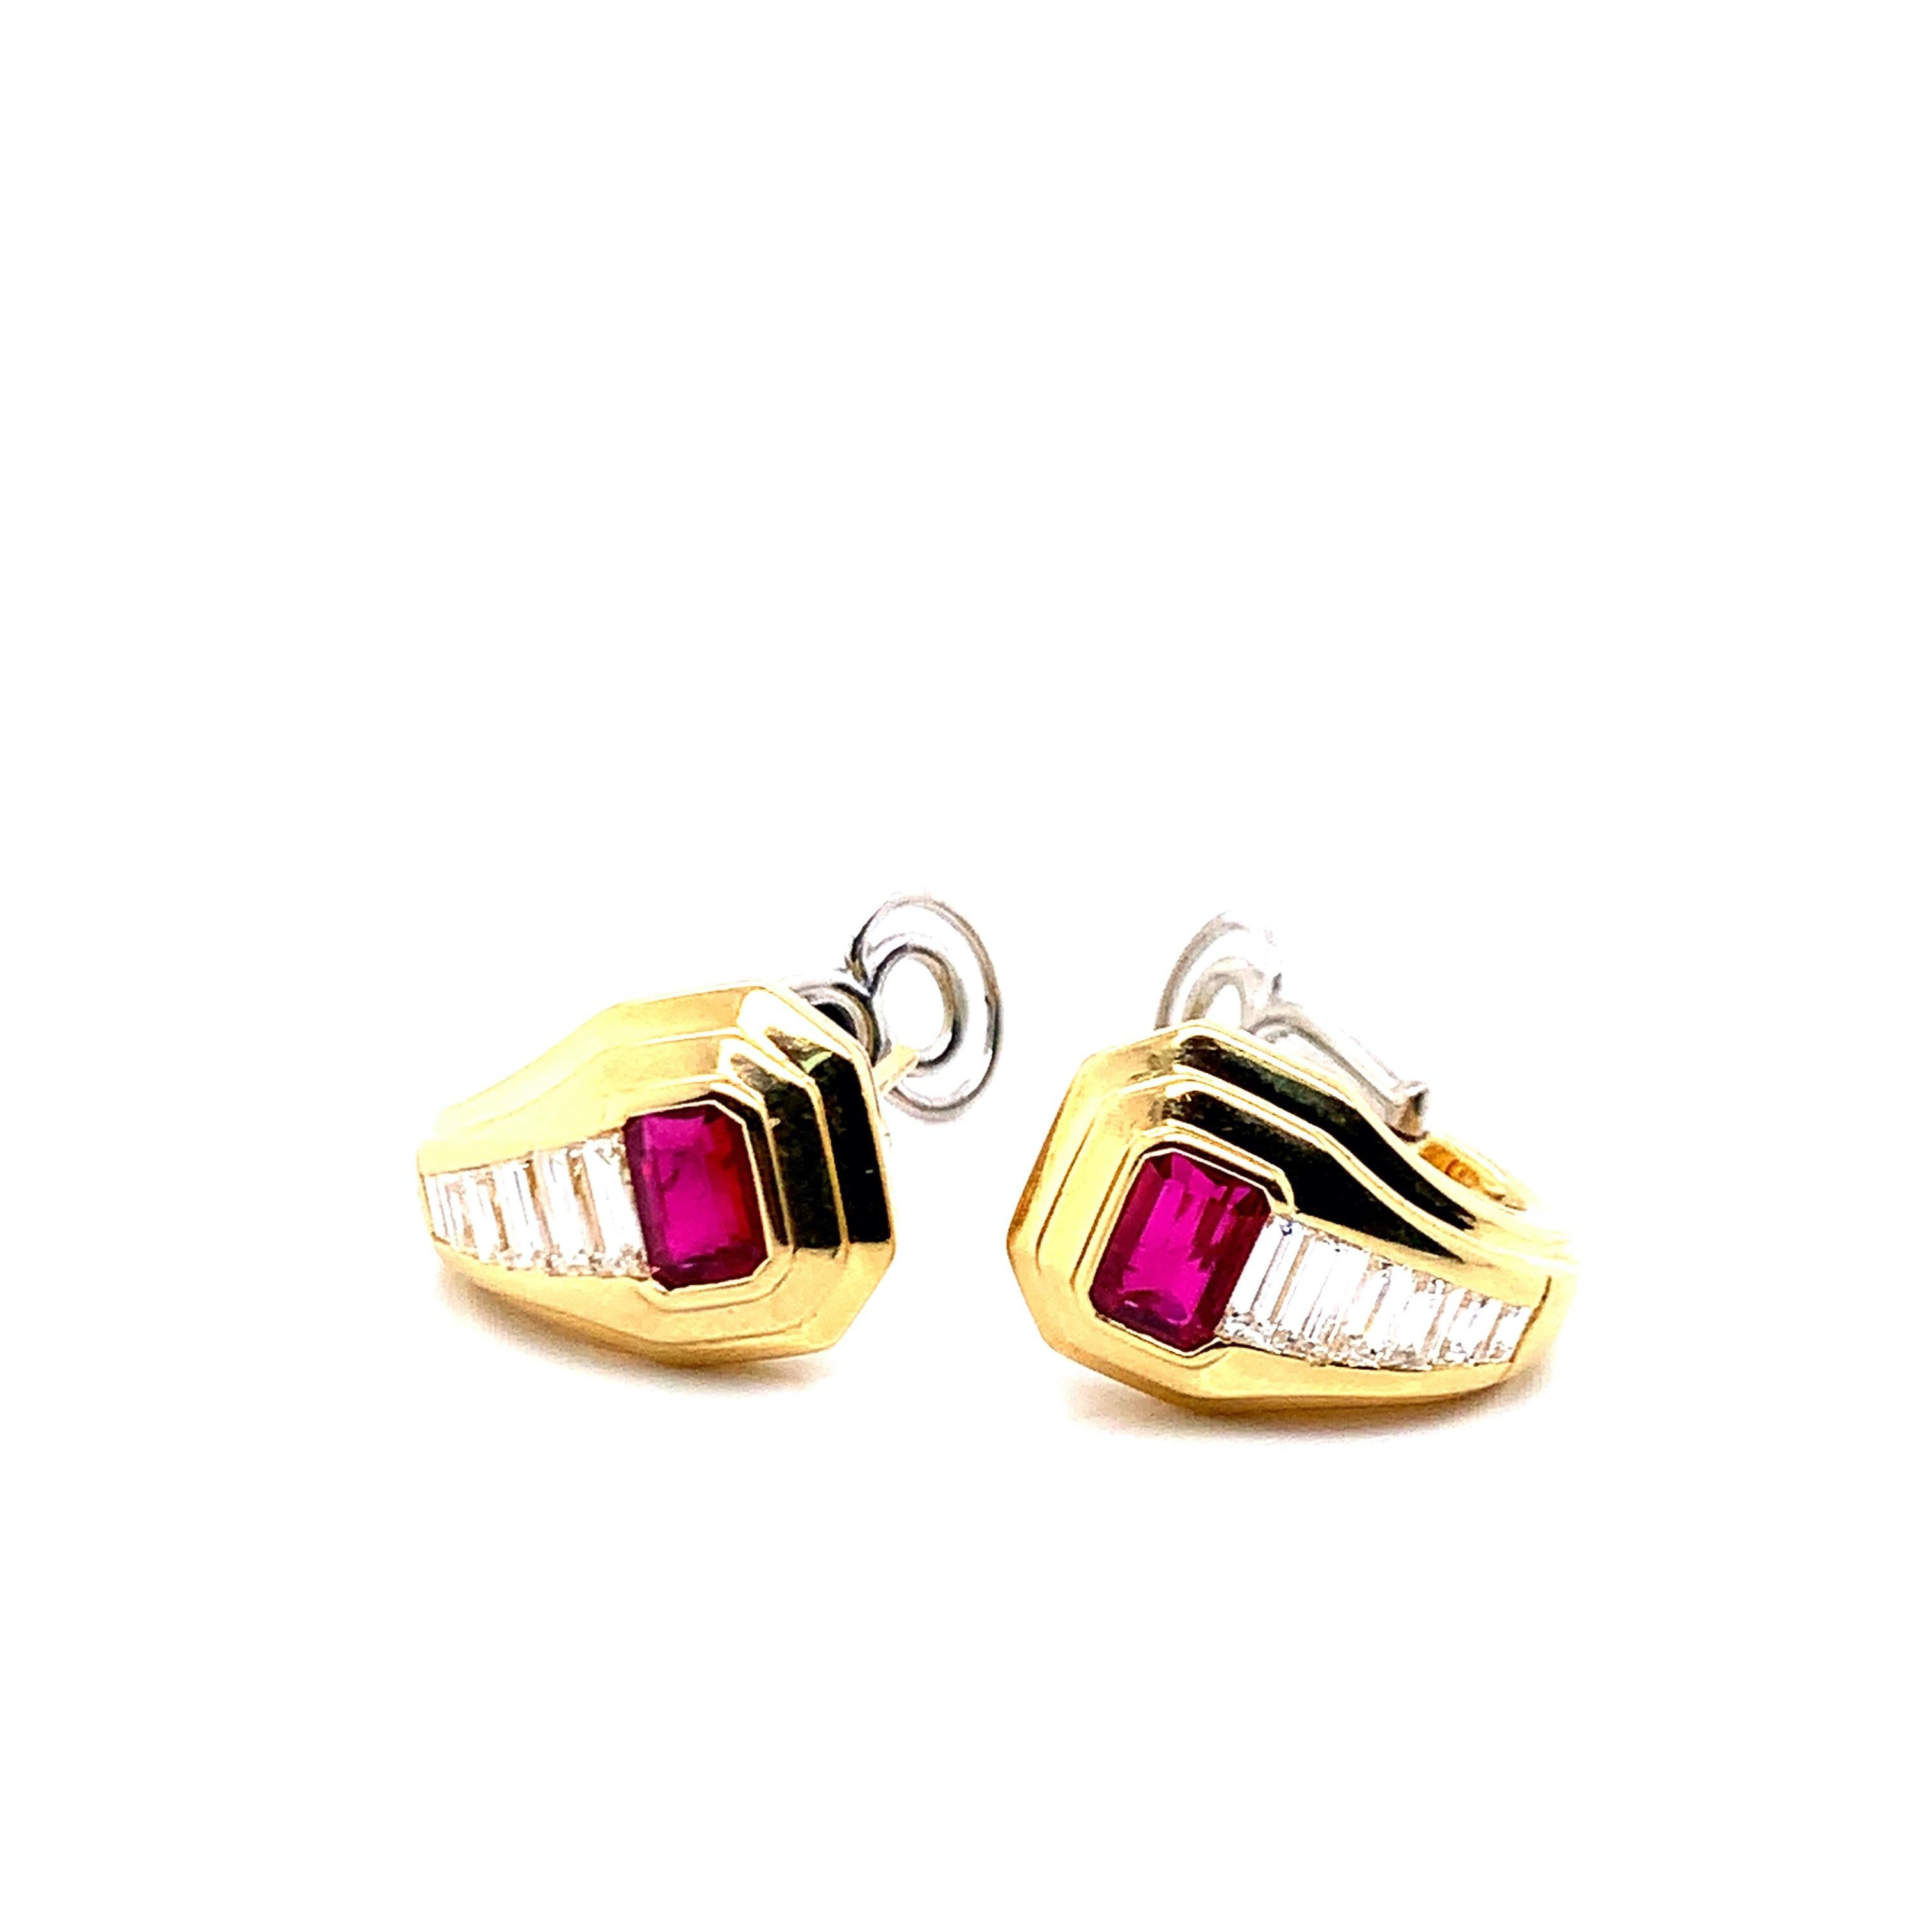 A pair of 18 karat yellow gold earrings with ruby & diamonds, with a total weight of 14.8 grams. The baguette cut white diamonds weigh 1.30 carat, and the emerald cut rubies weigh 1.71 carat. Signed Bvlgari.